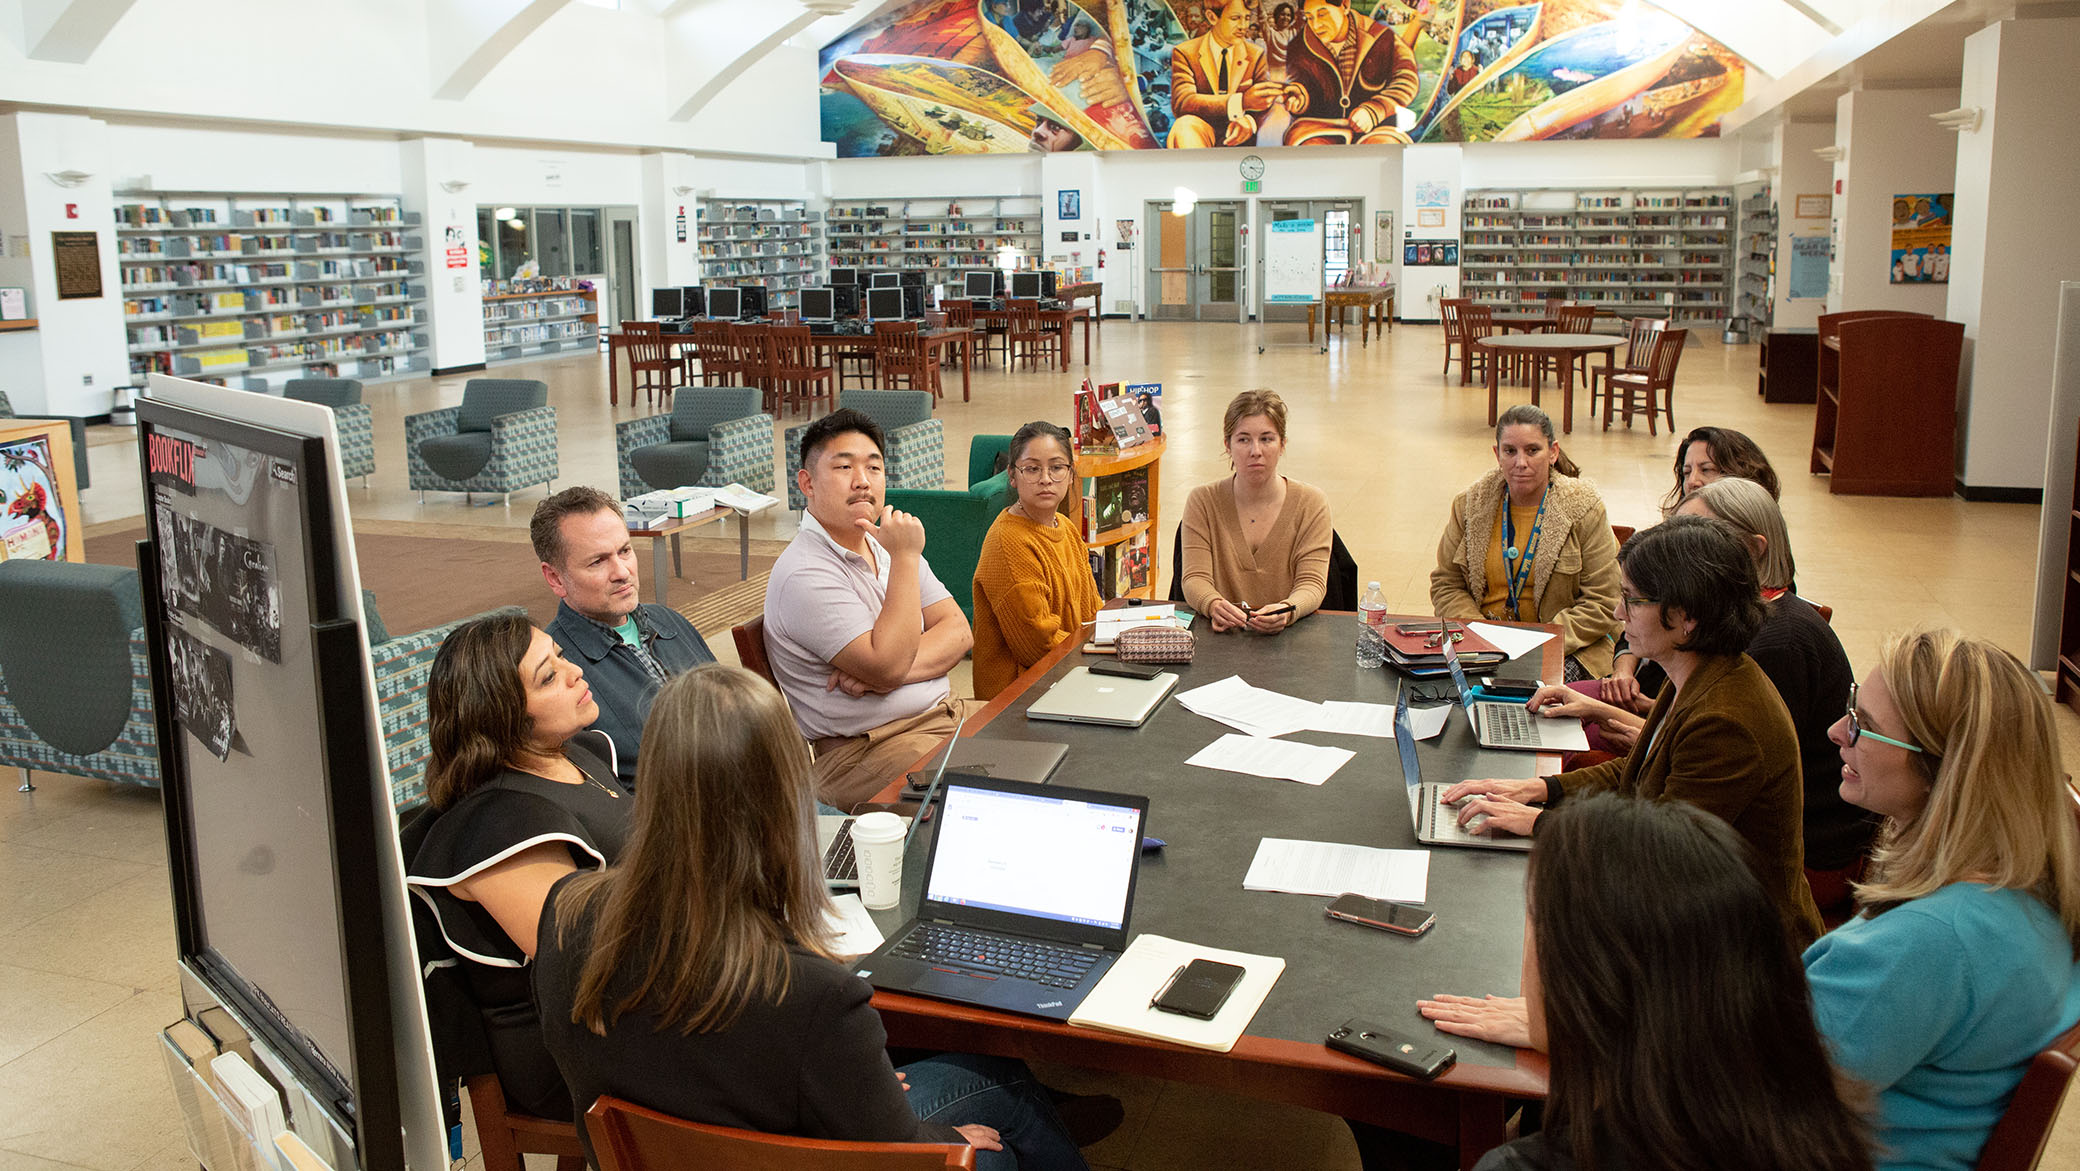 Teachers and staff from UCLA Community School meet with UCLA professors to discuss the various research projects happening at the school.